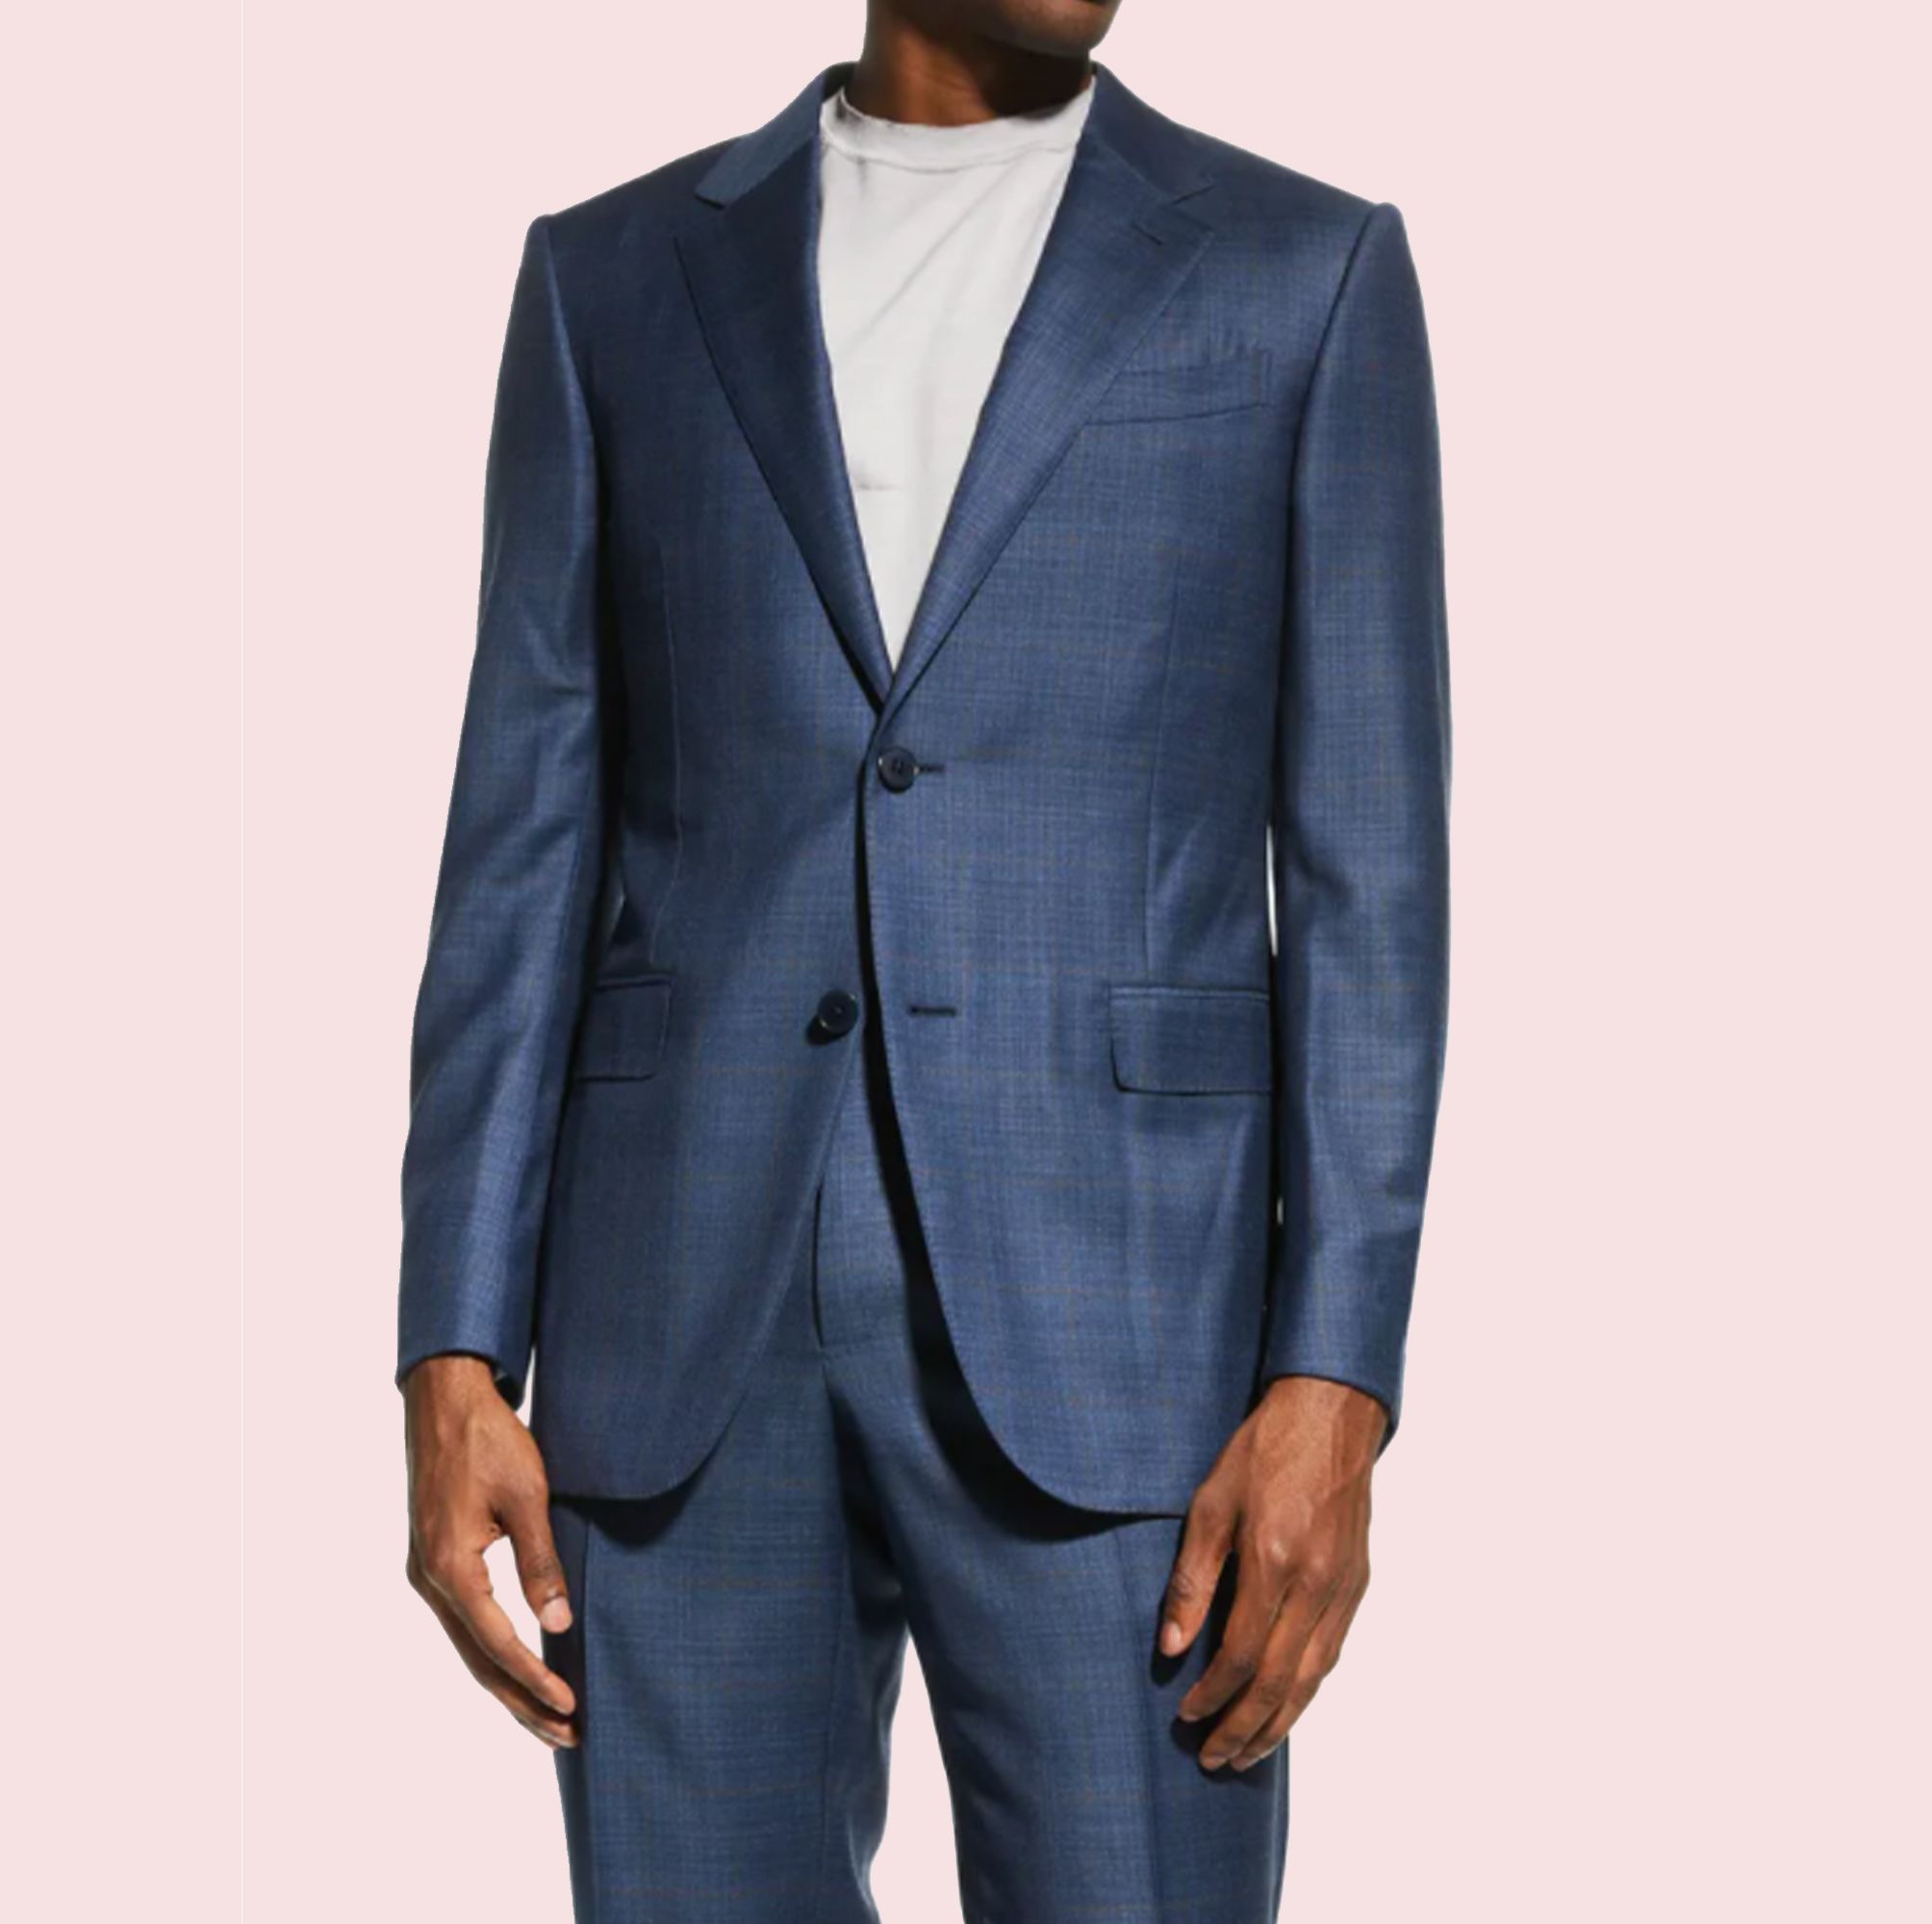 The 12 Best Suits Summer to Keep You Cool in the Heat